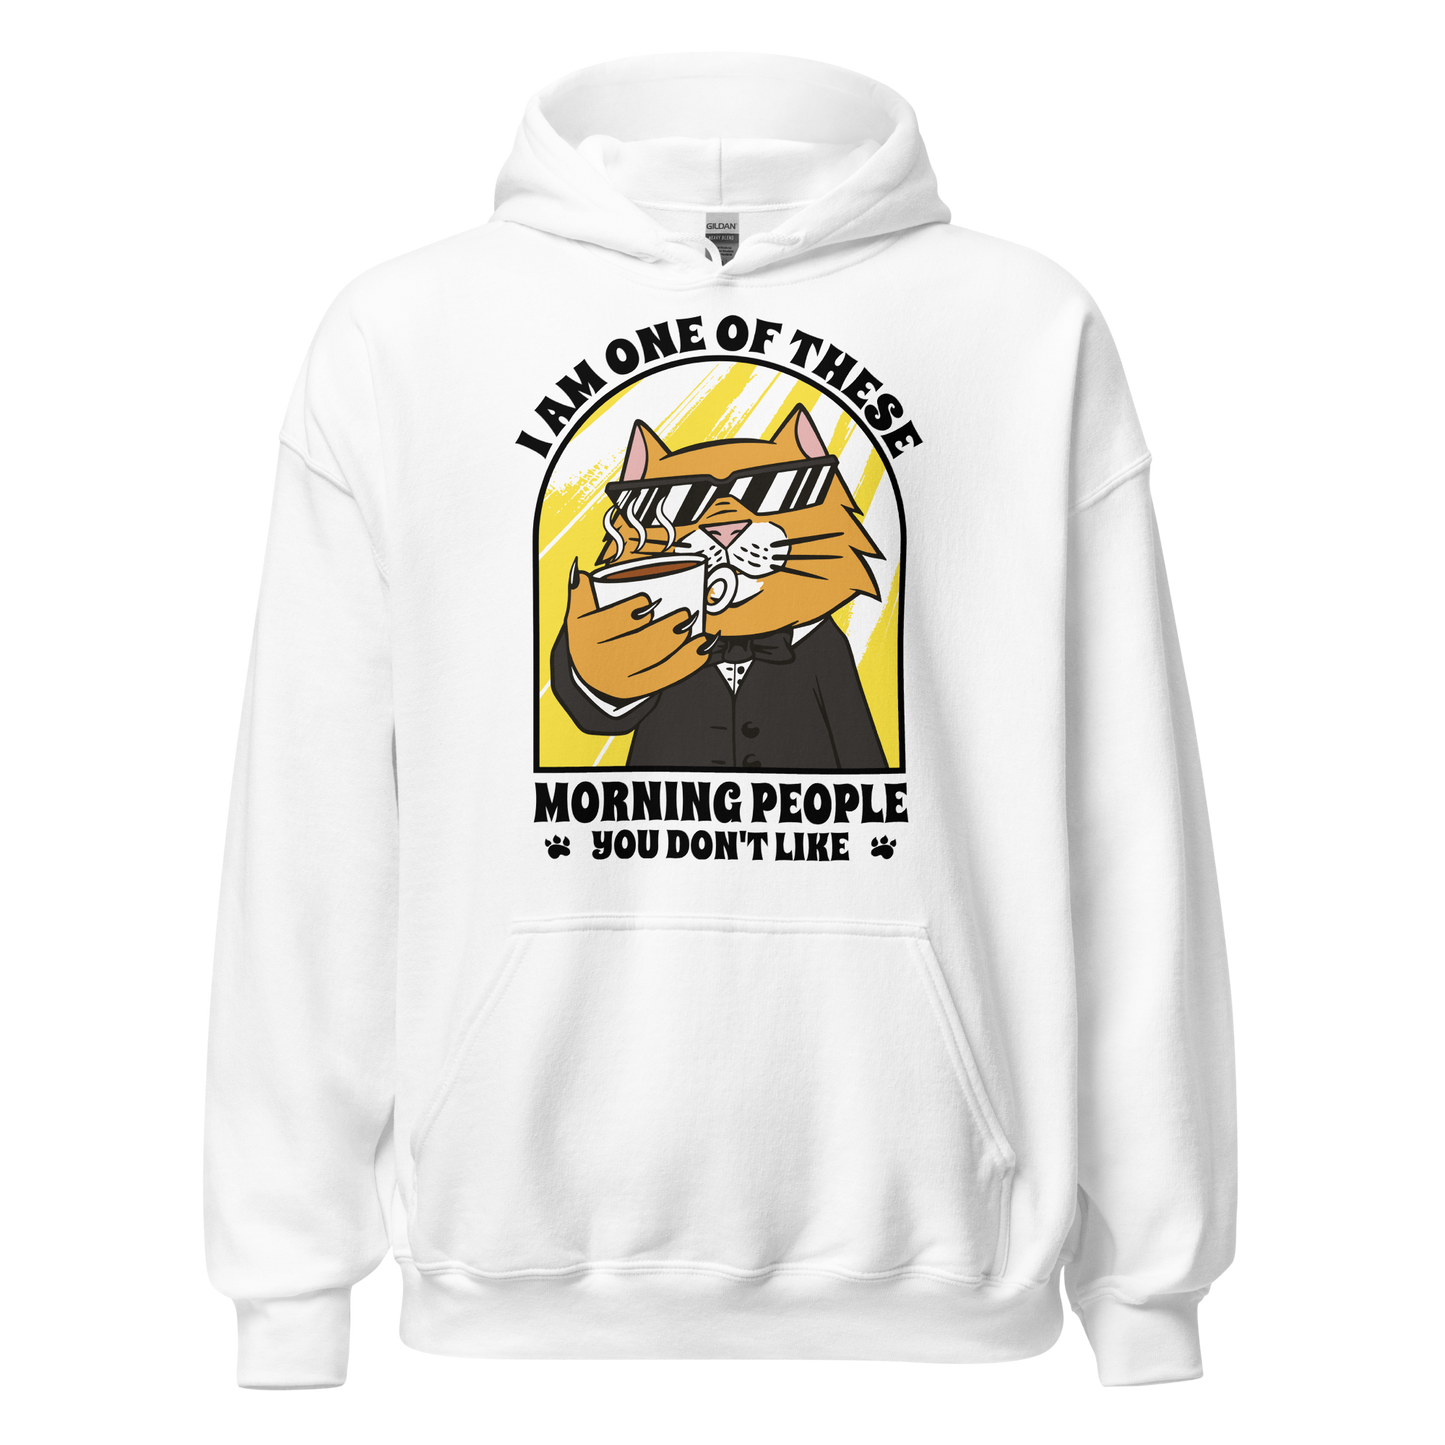 Morning people quote cat | Unisex Hoodie